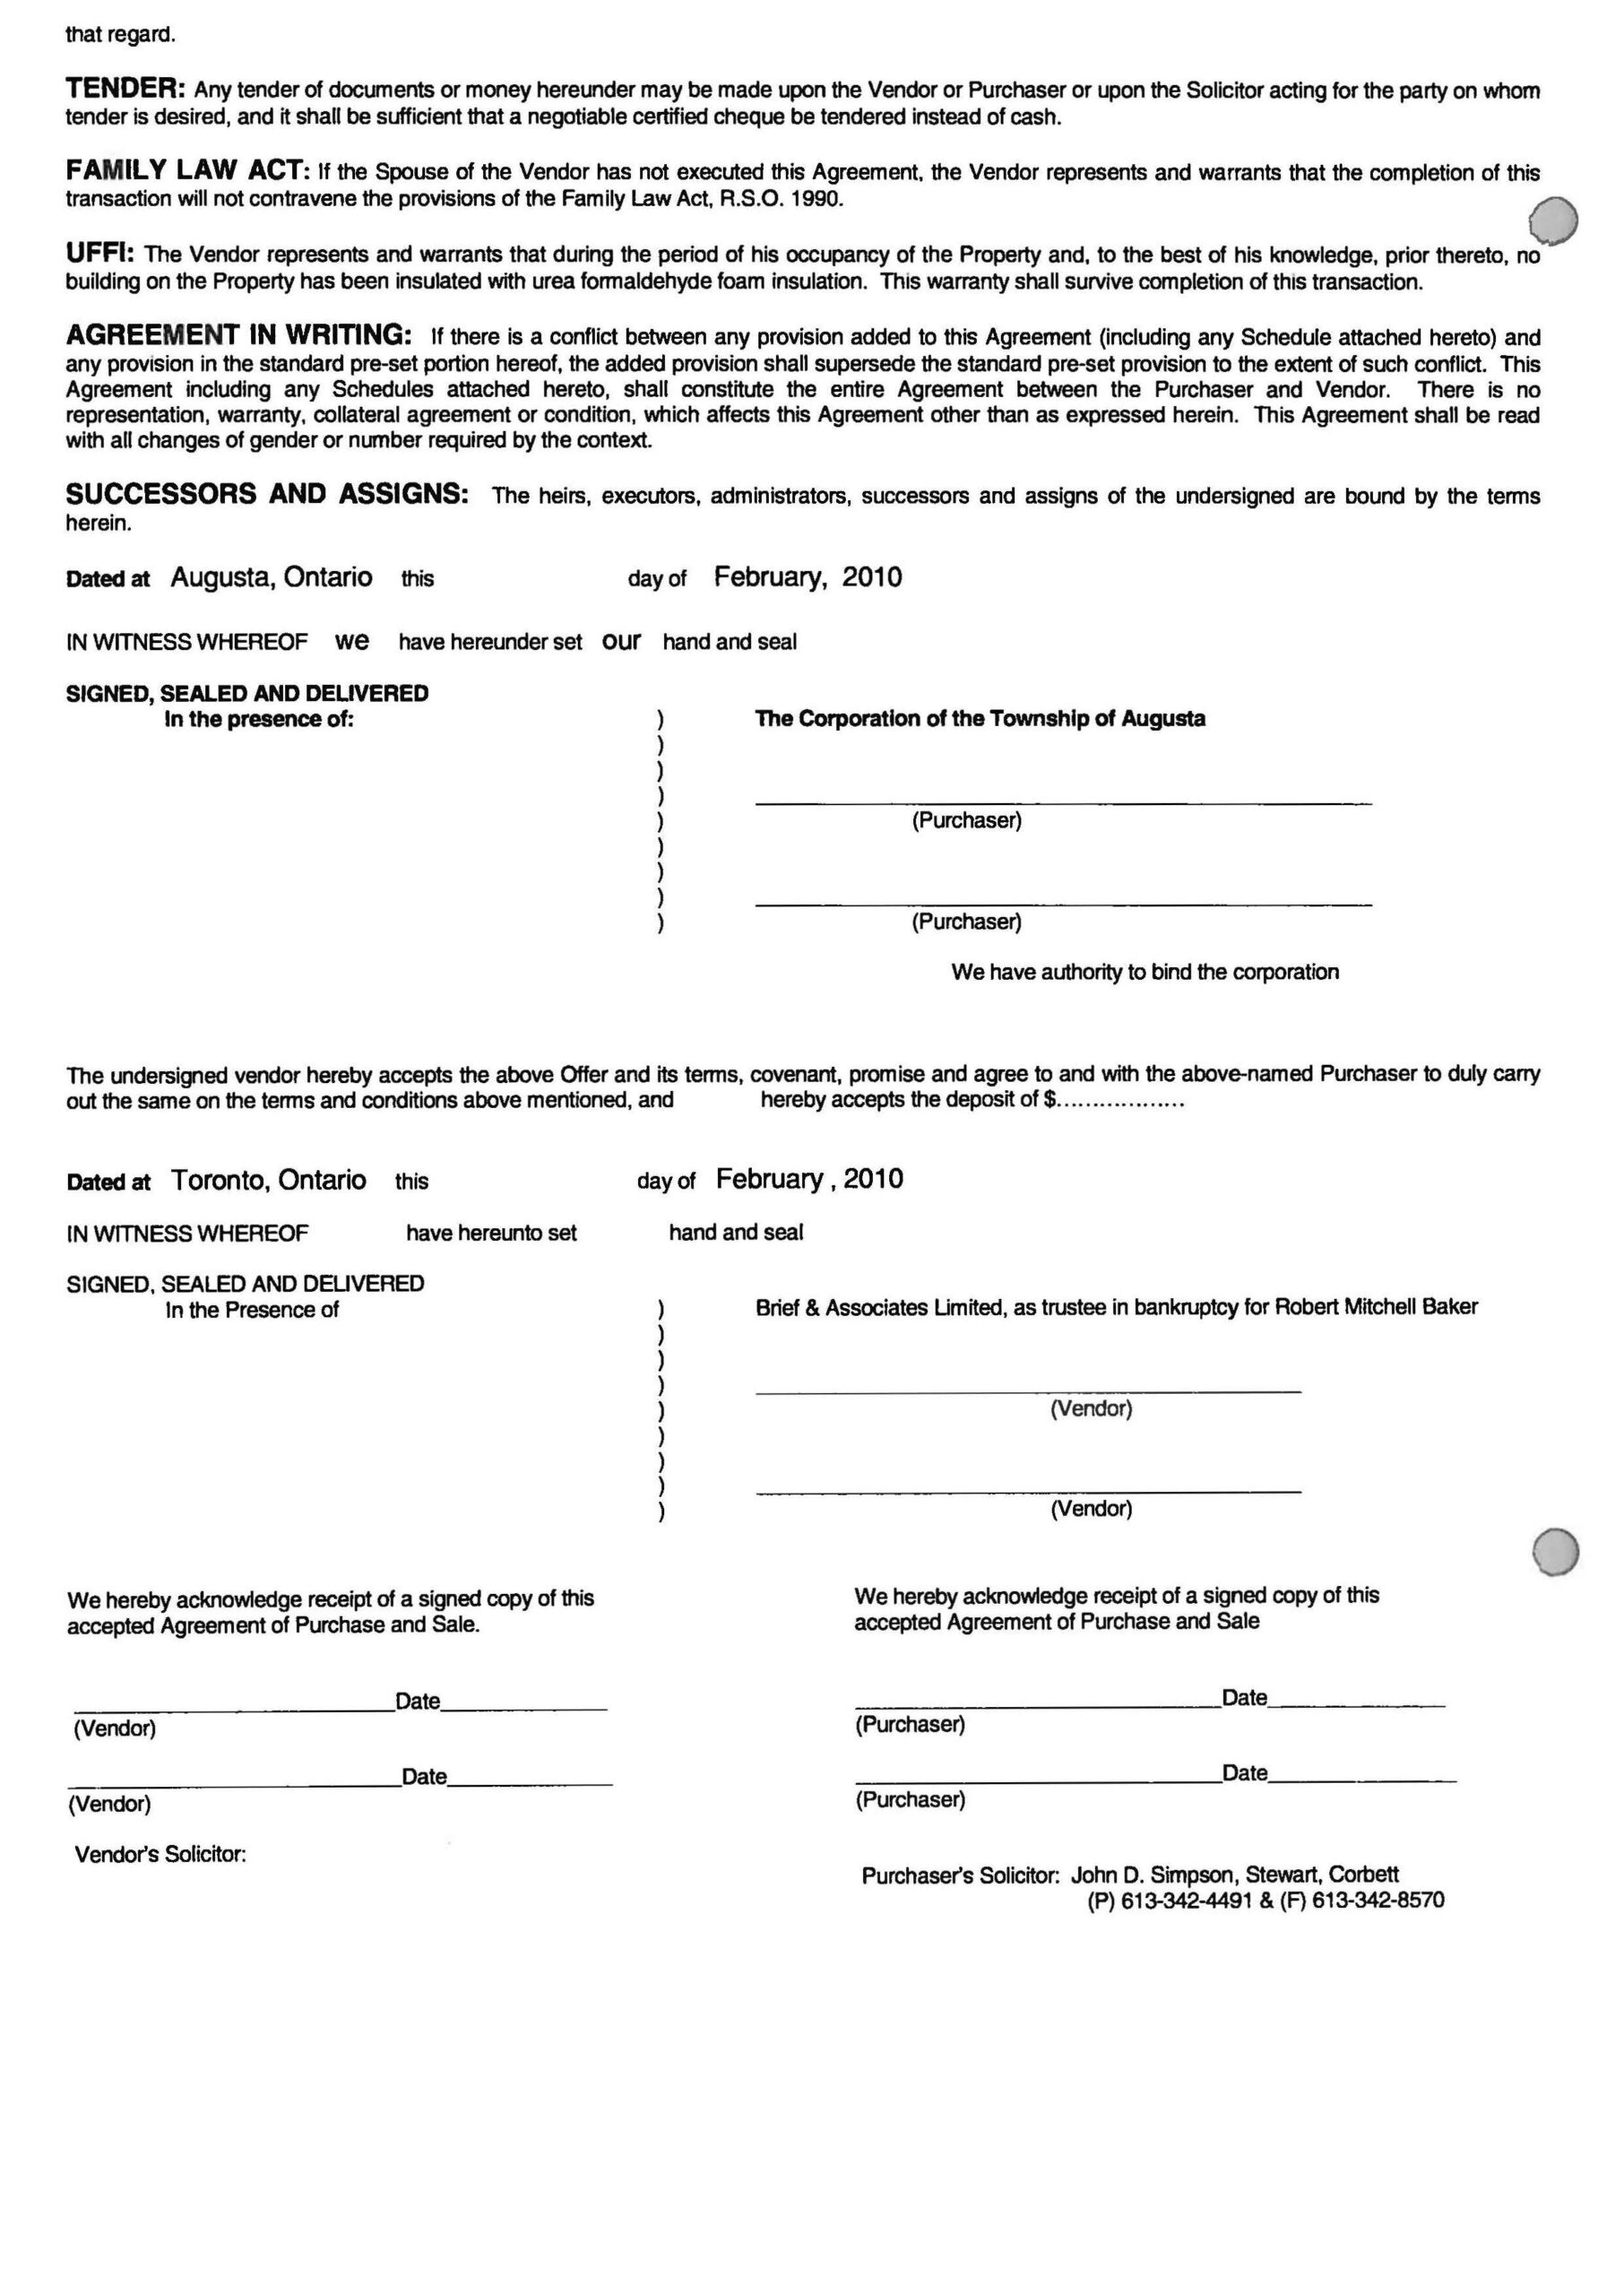 Agreement of purchase and sale, page 02